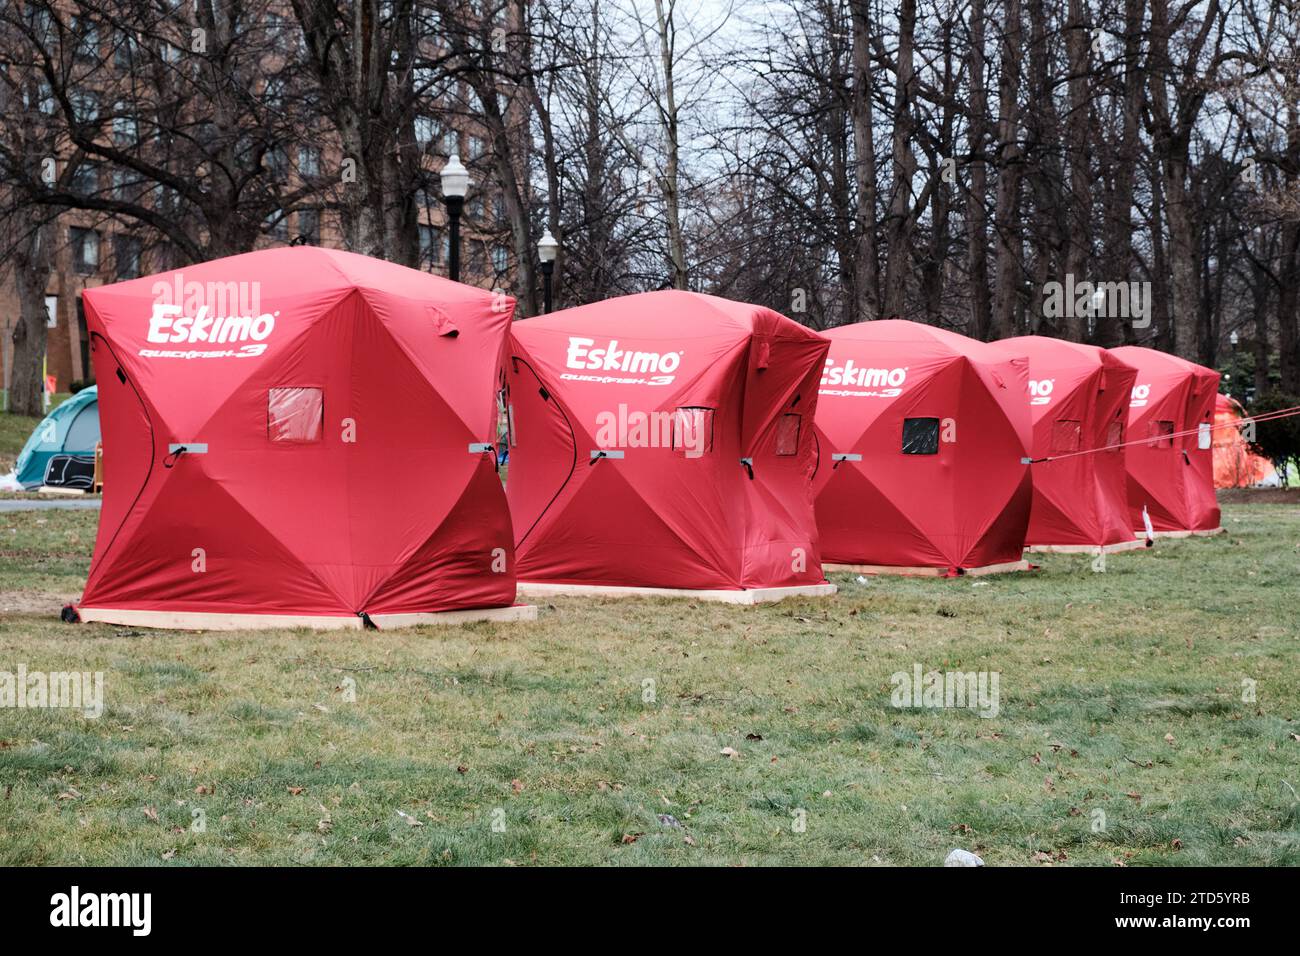 Eskimo tents, usually used for ice fishing, installed by